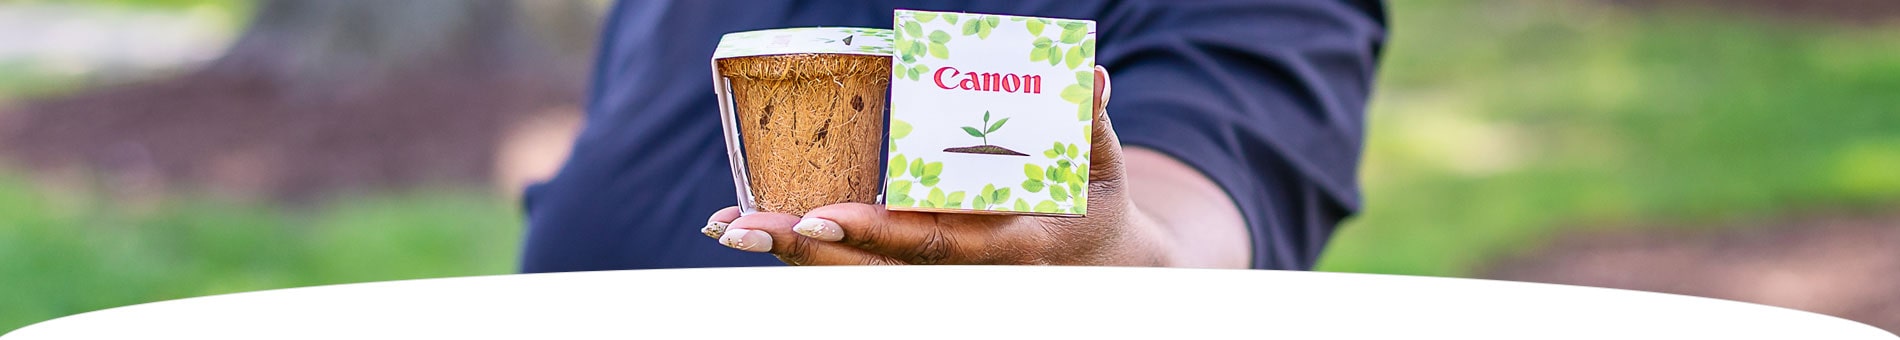 Image of hands holding a note with the Canon logo and images of leaves